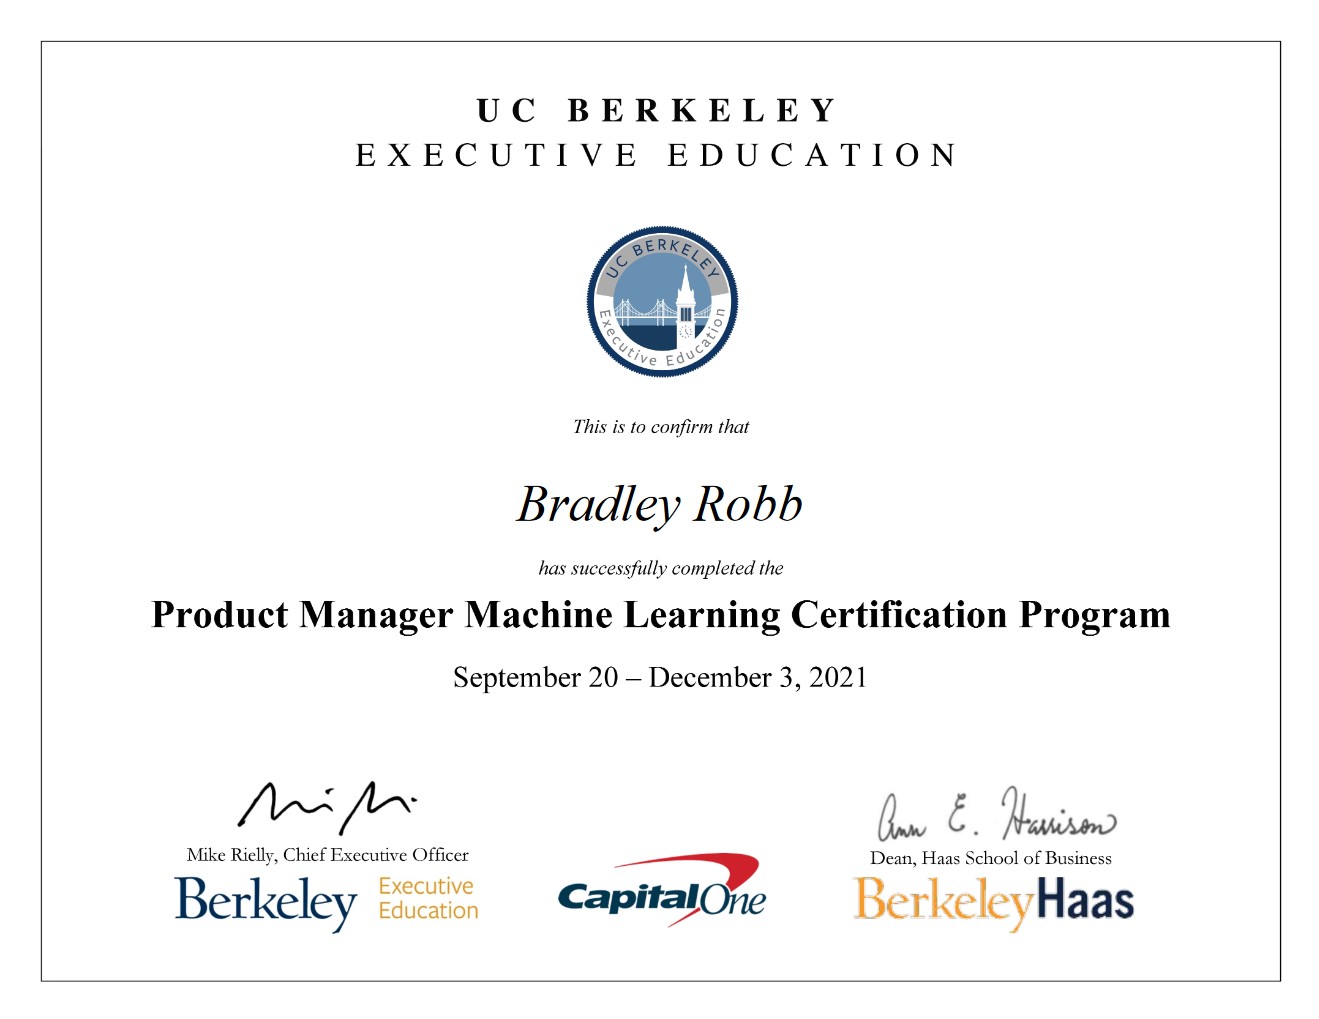  Product Manager Machine Learning Certification Program